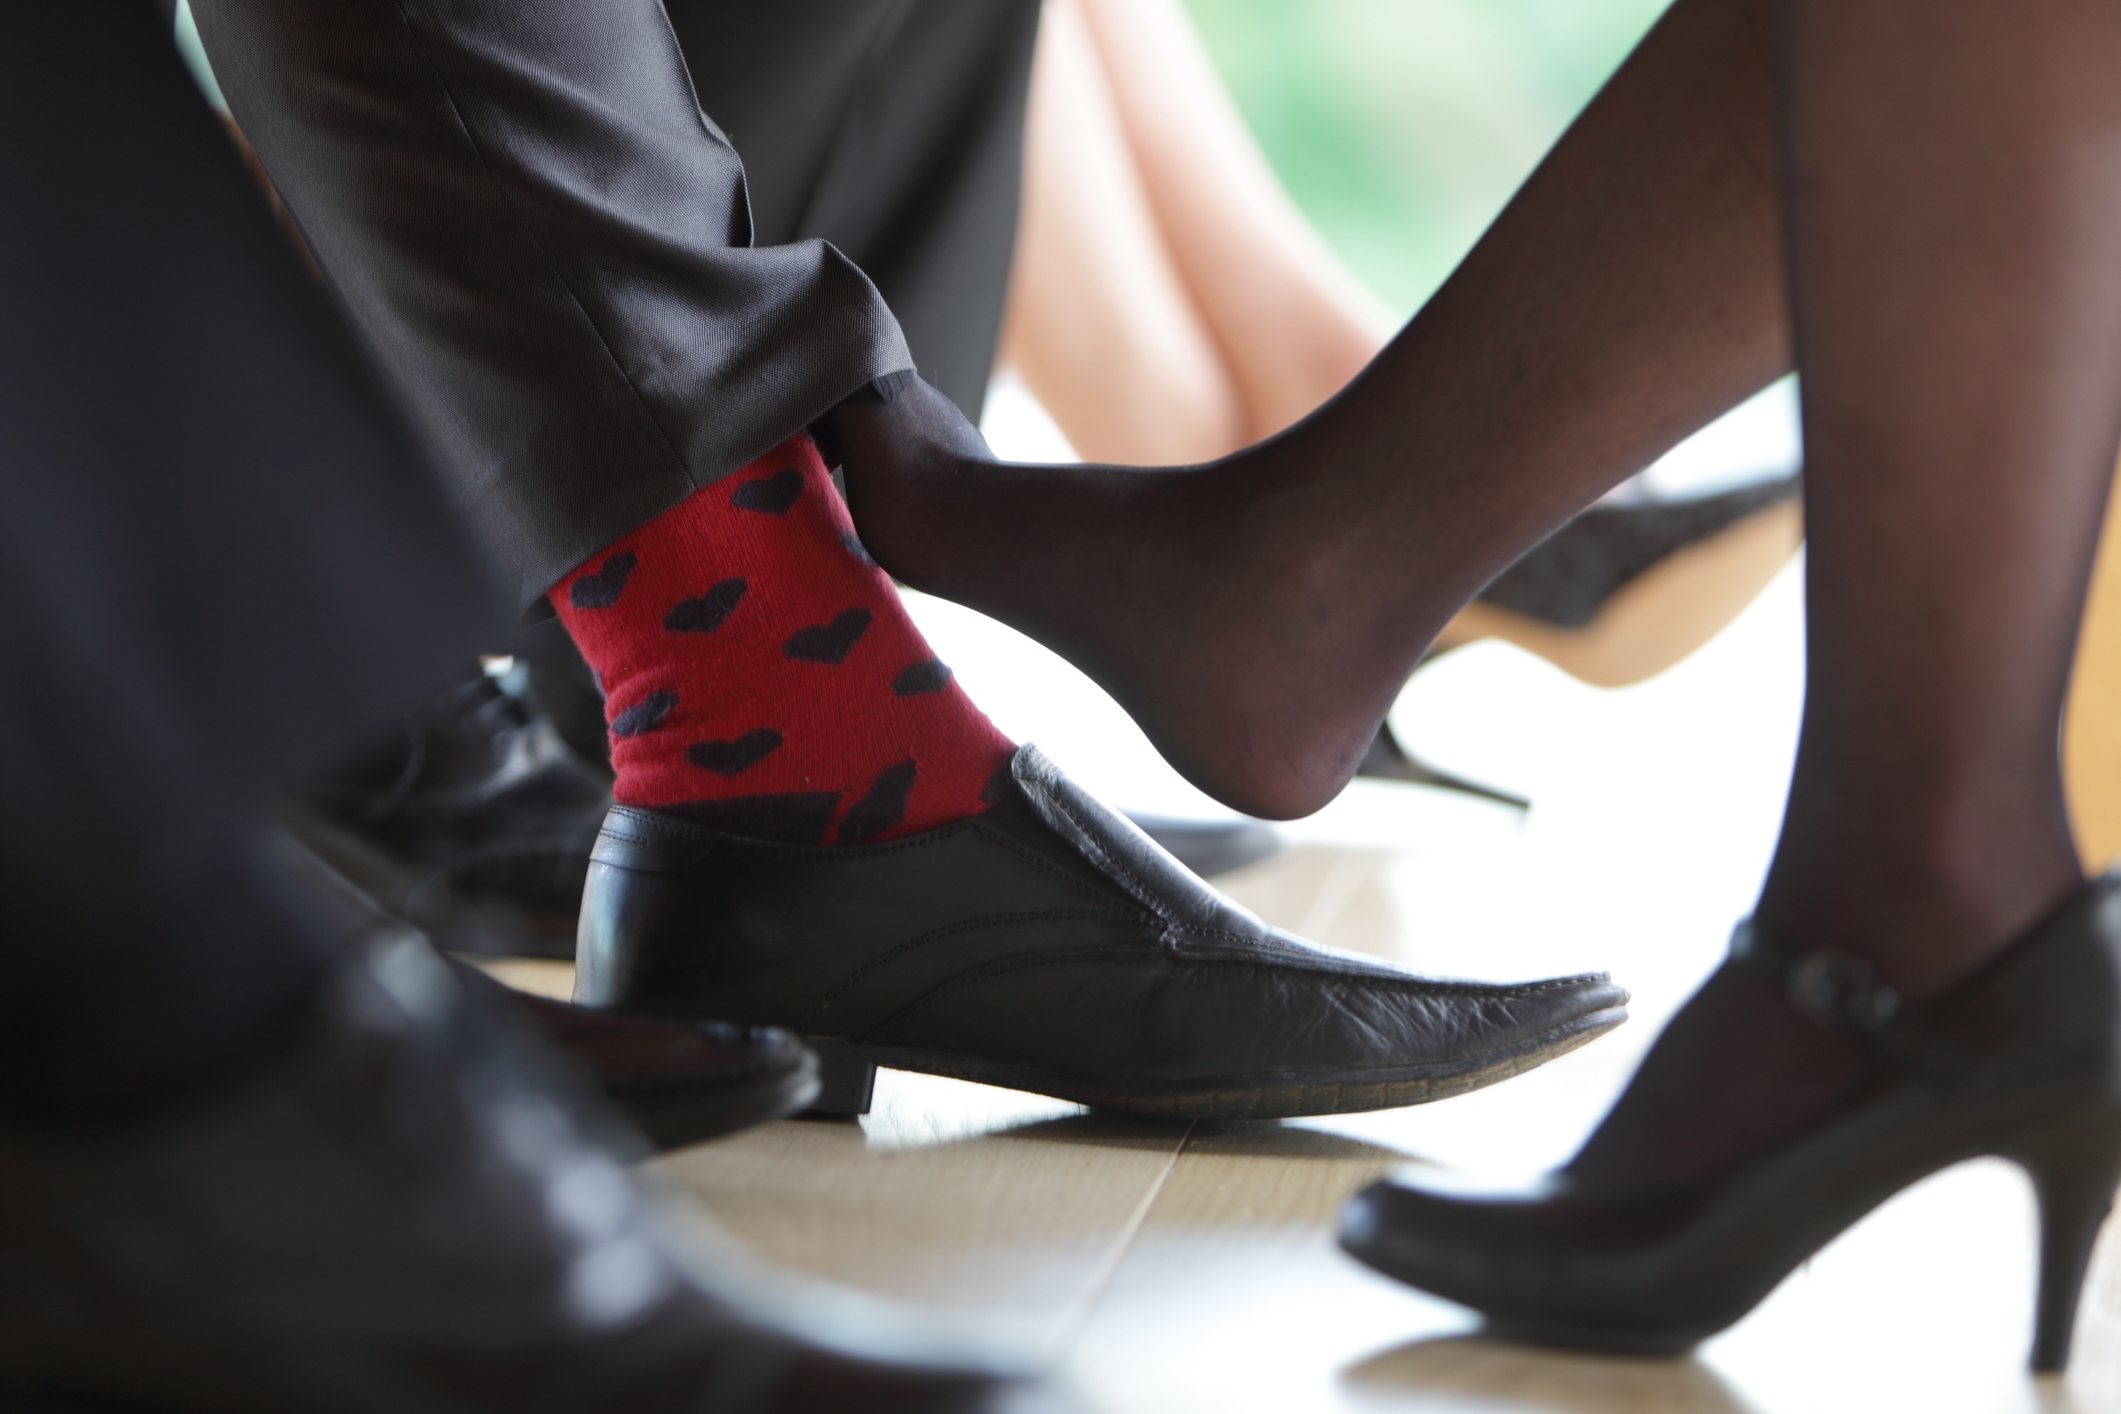 Two people flirtatiously touching feet under a table, one with heart-patterned socks